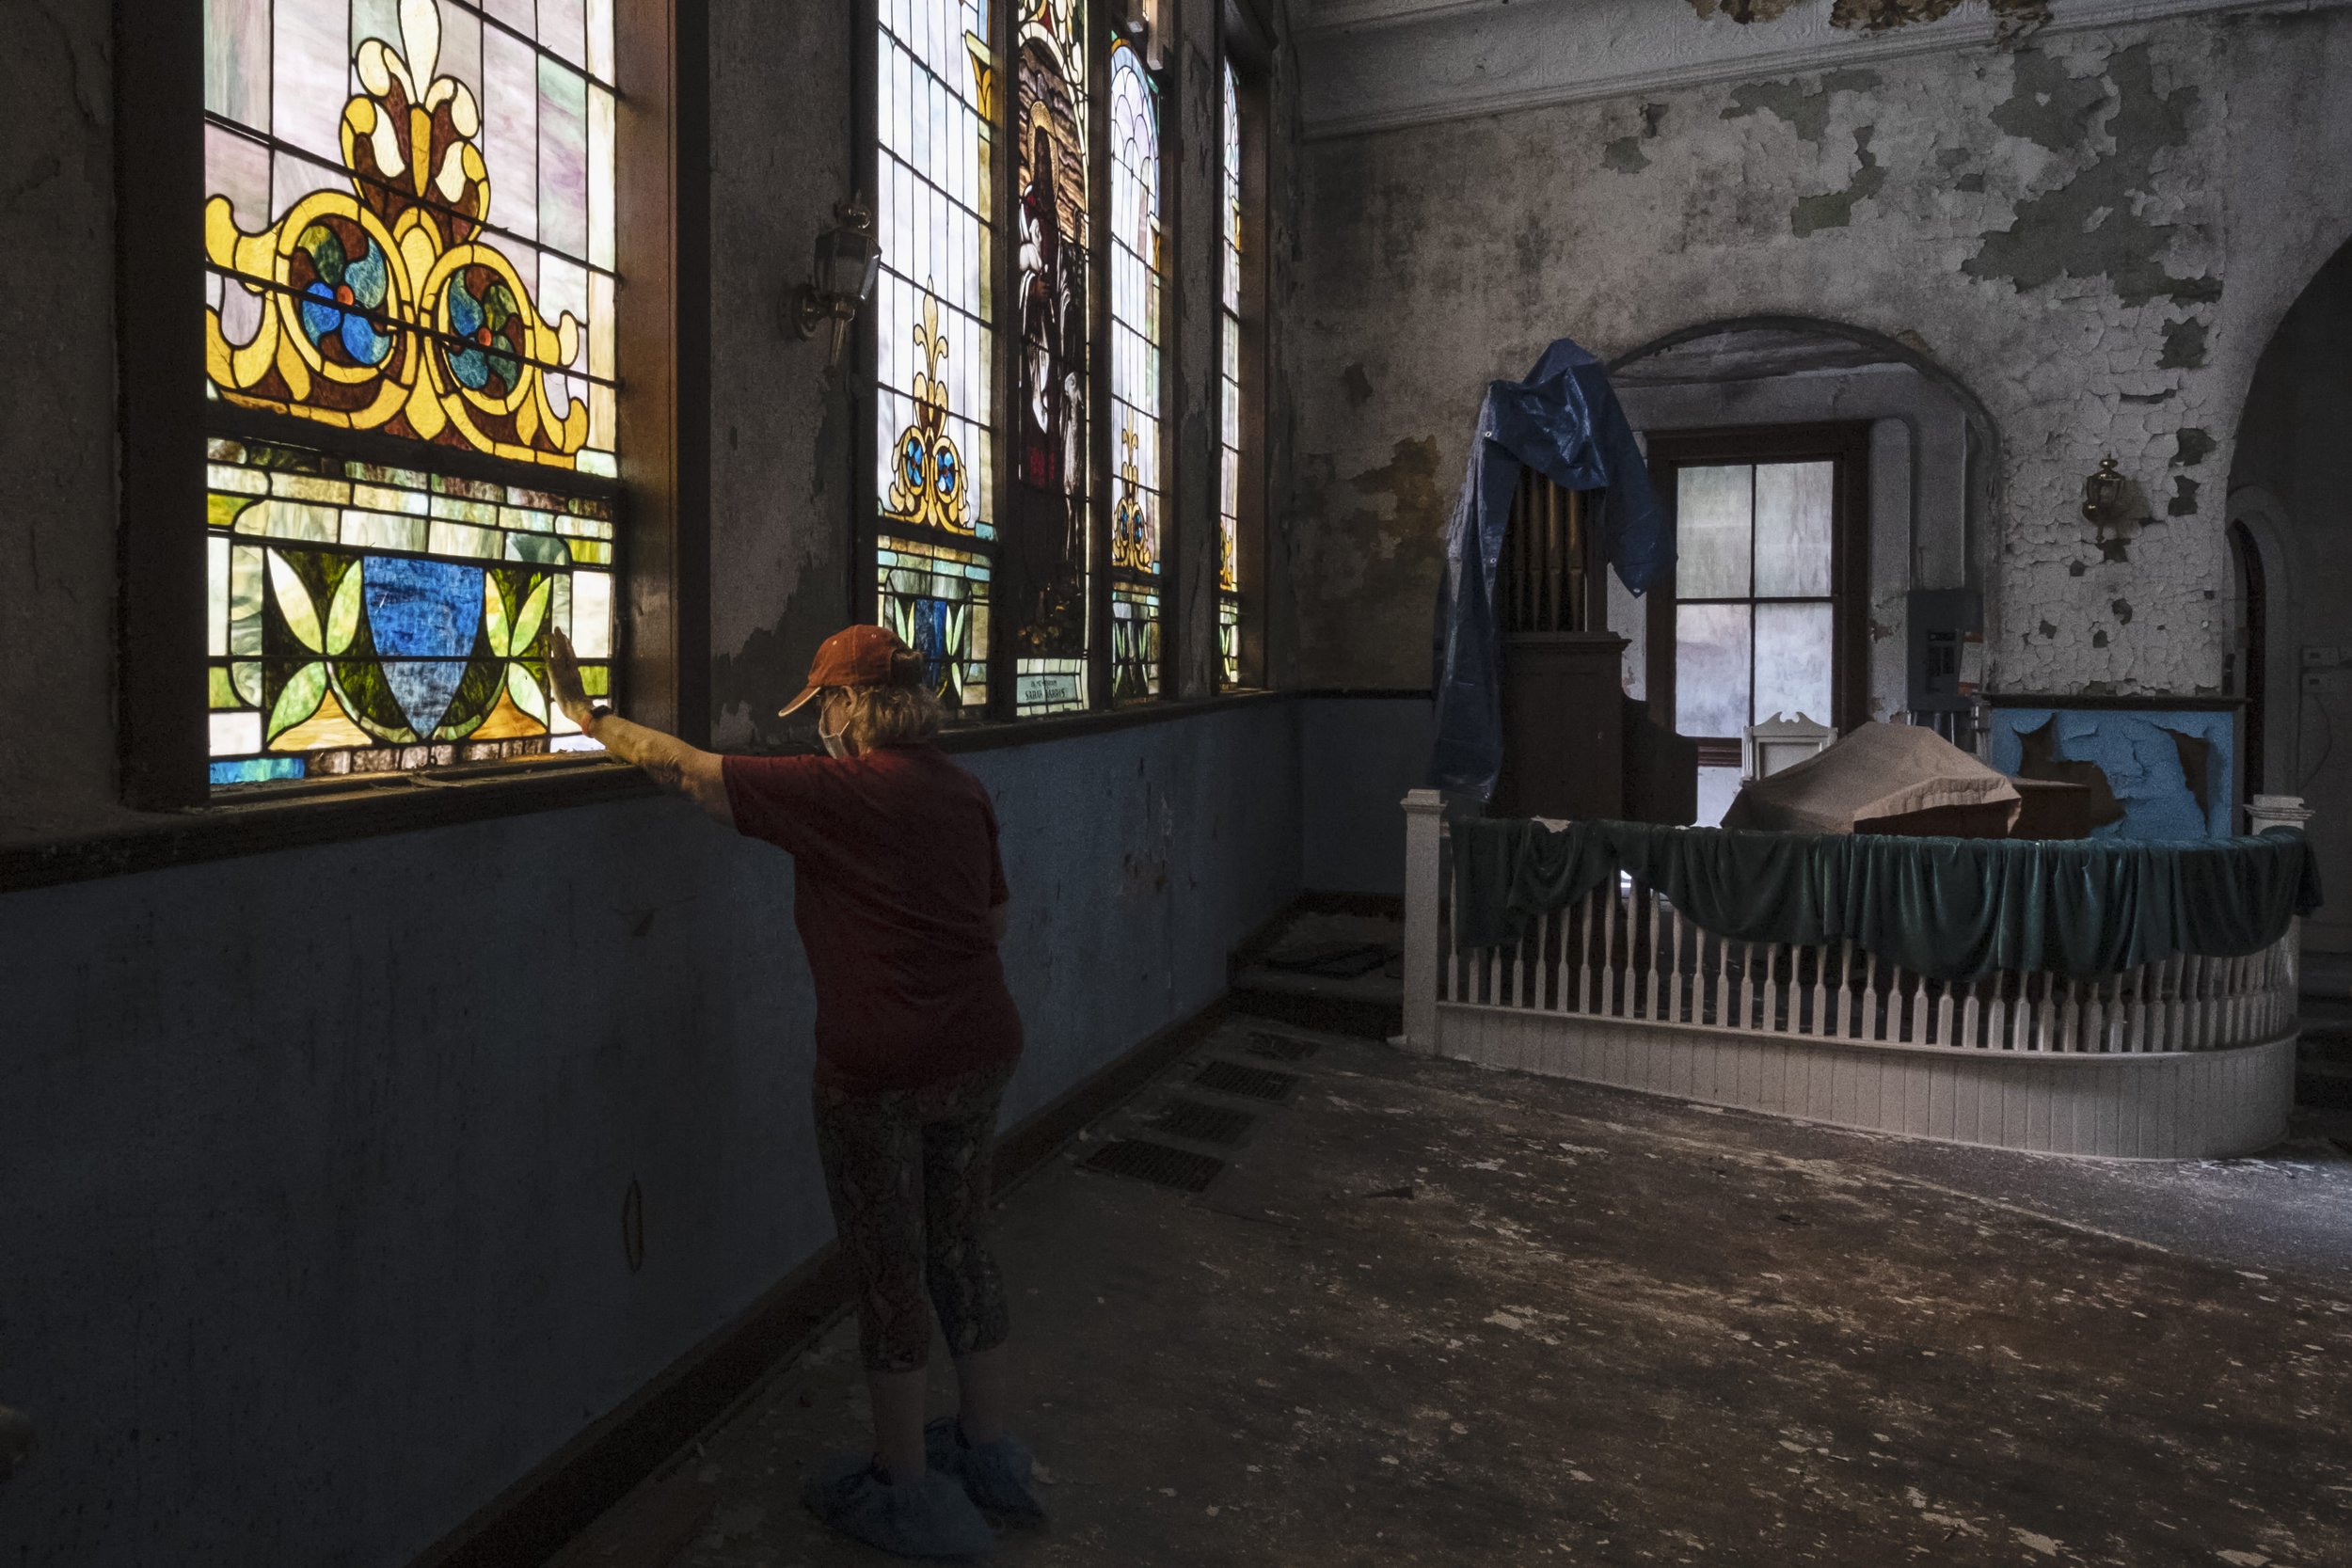  Retired school psychologist and Mount Zion Baptist Church Preservation Society's secretary Beth Amoriya touches the stained glass windows inside the church in Athens, Ohio Thursday April 20, 2023. According to Mount Zion Baptist Church Preservation 